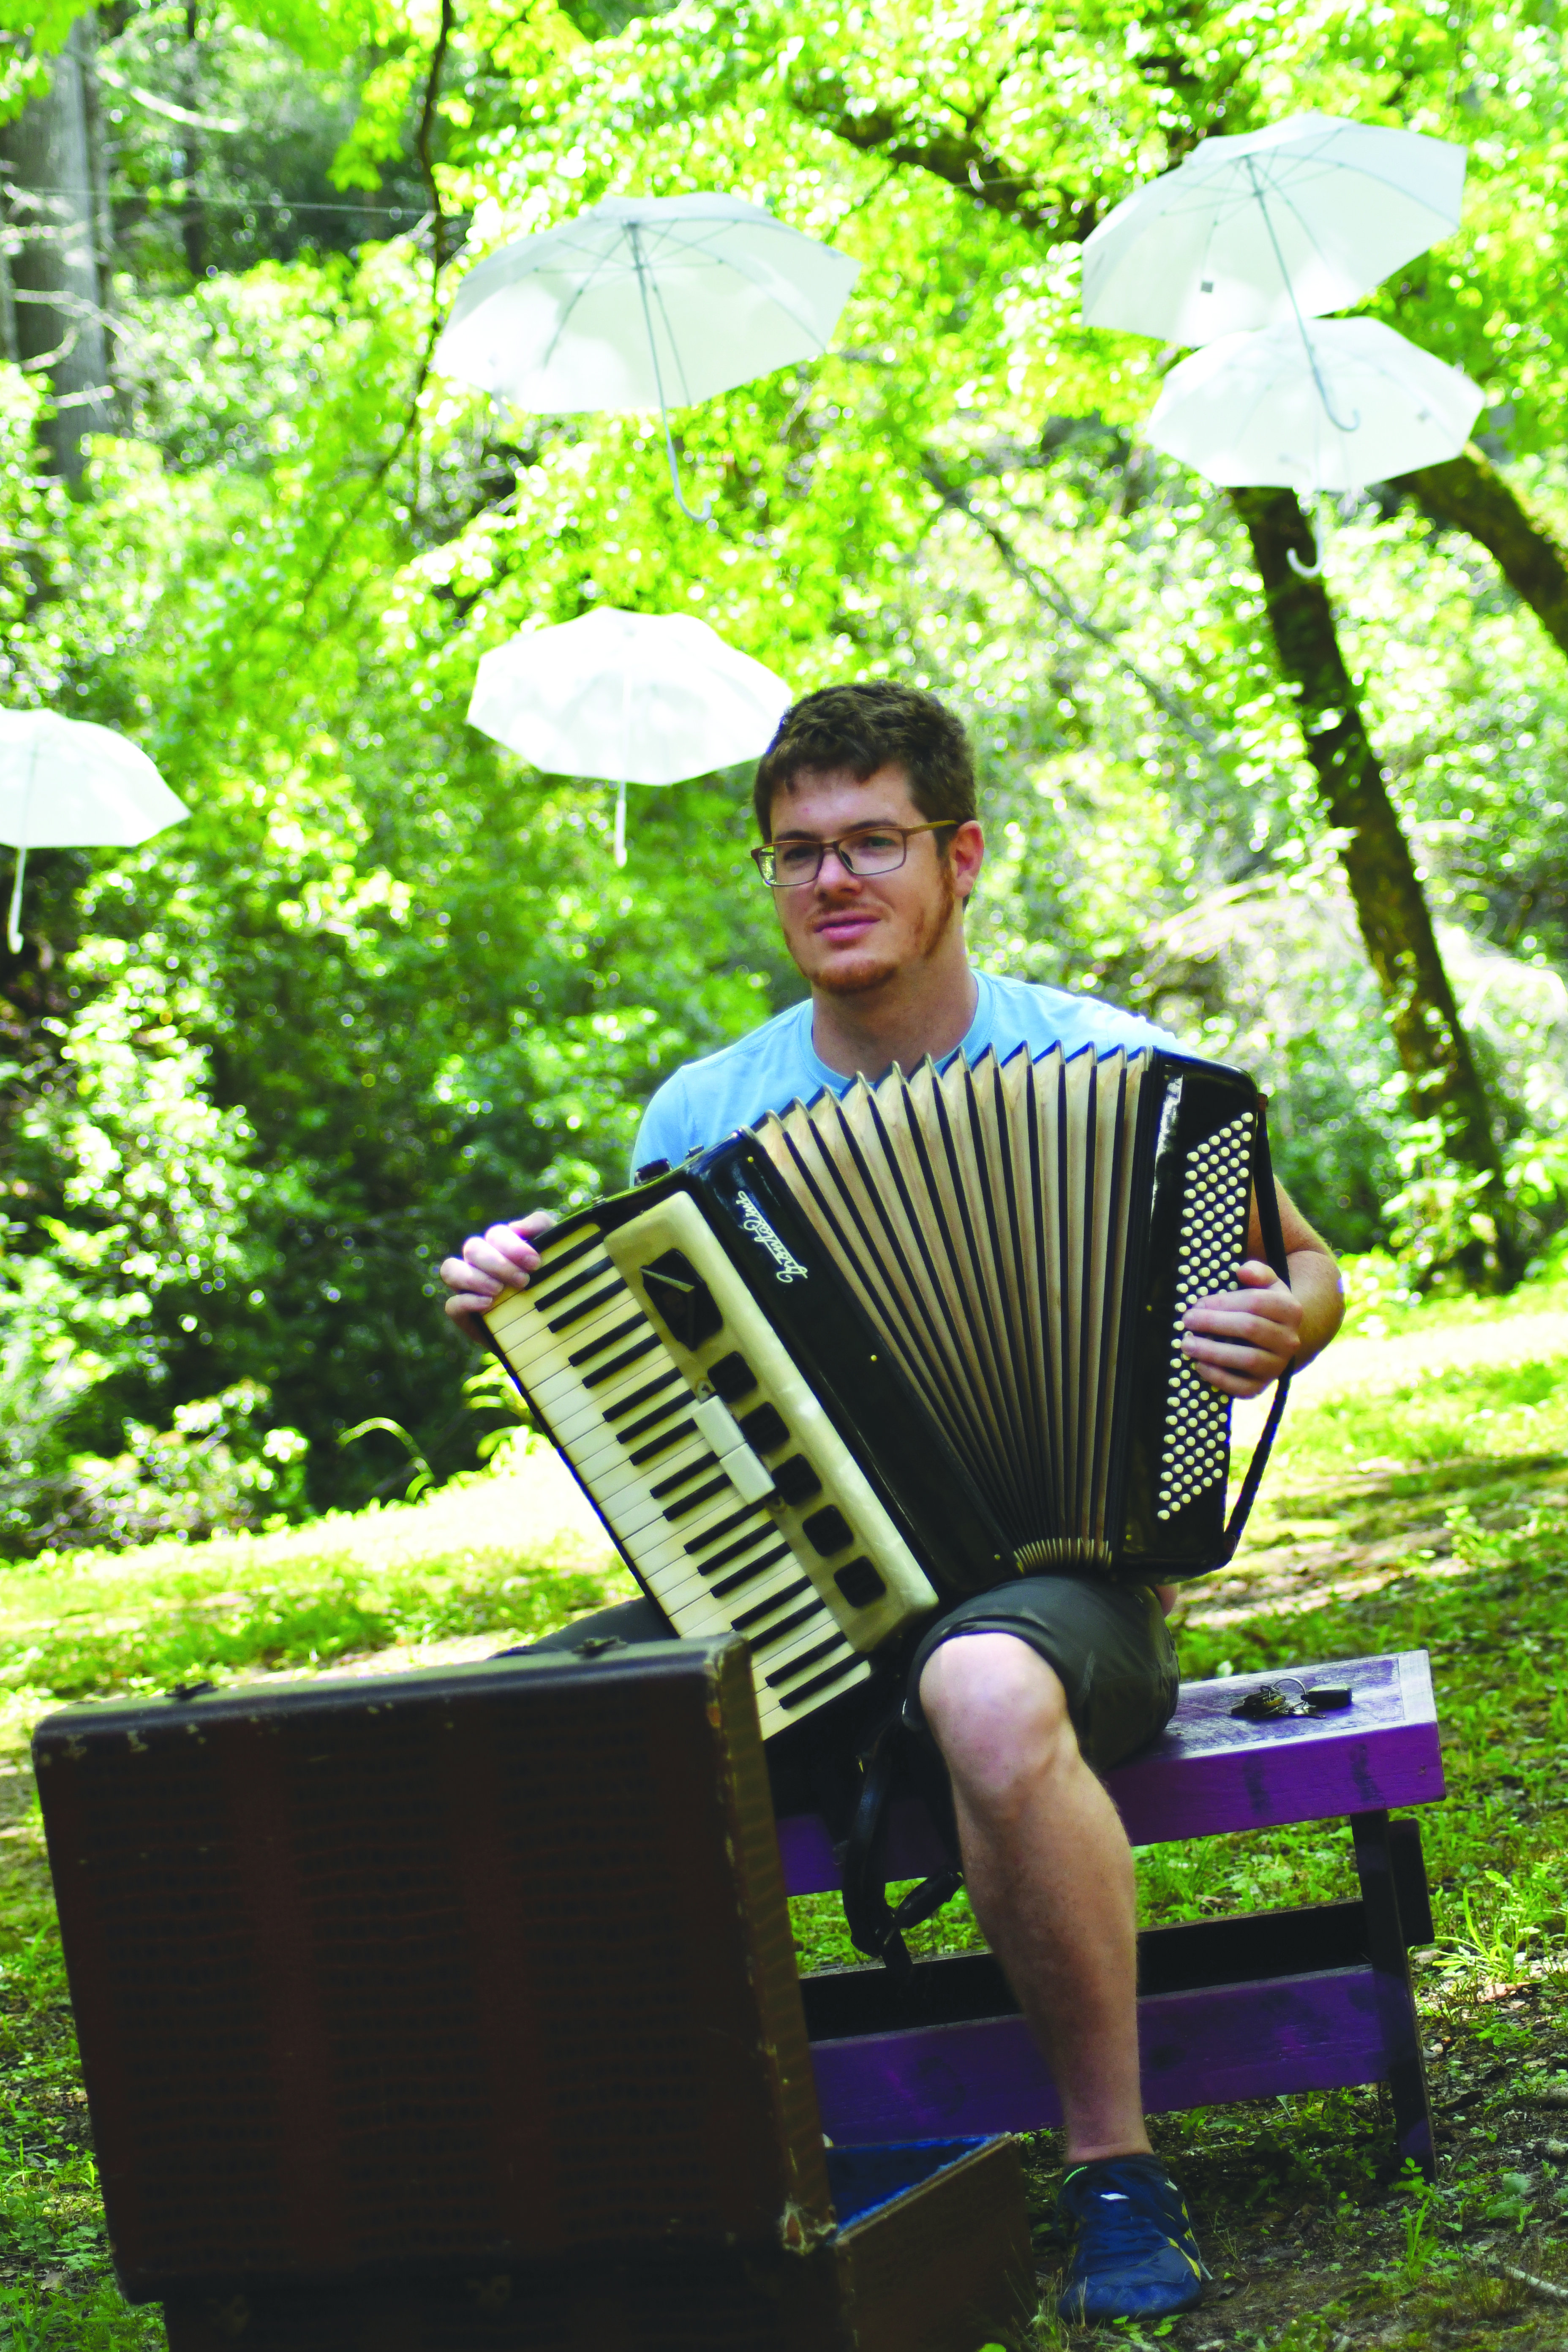 Enoch Autry/The Clayton Tribune. James Fairchild of Tiger plays the accordion during the Great American Art Show & Contest on Aug. 5 in Lakemont. In the background are hanging white umbrellas. Other umbrellas were hung around the park area.